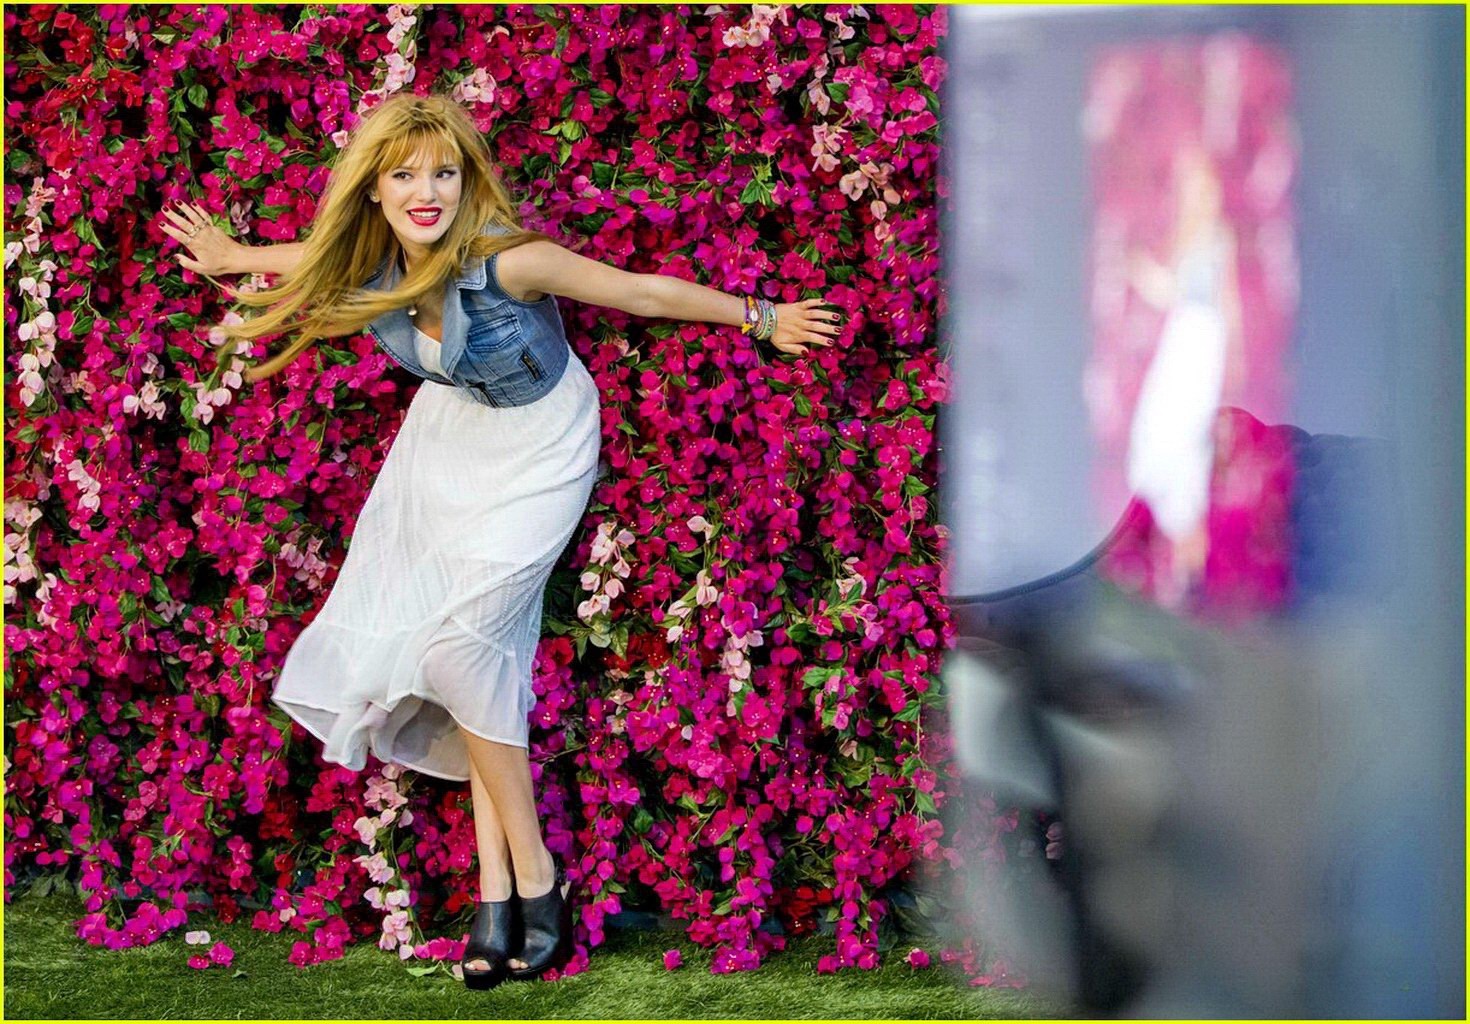 Bella Thorne looking very hot in Candie's photoshoot for Kohl's 2014 campaign #75206846